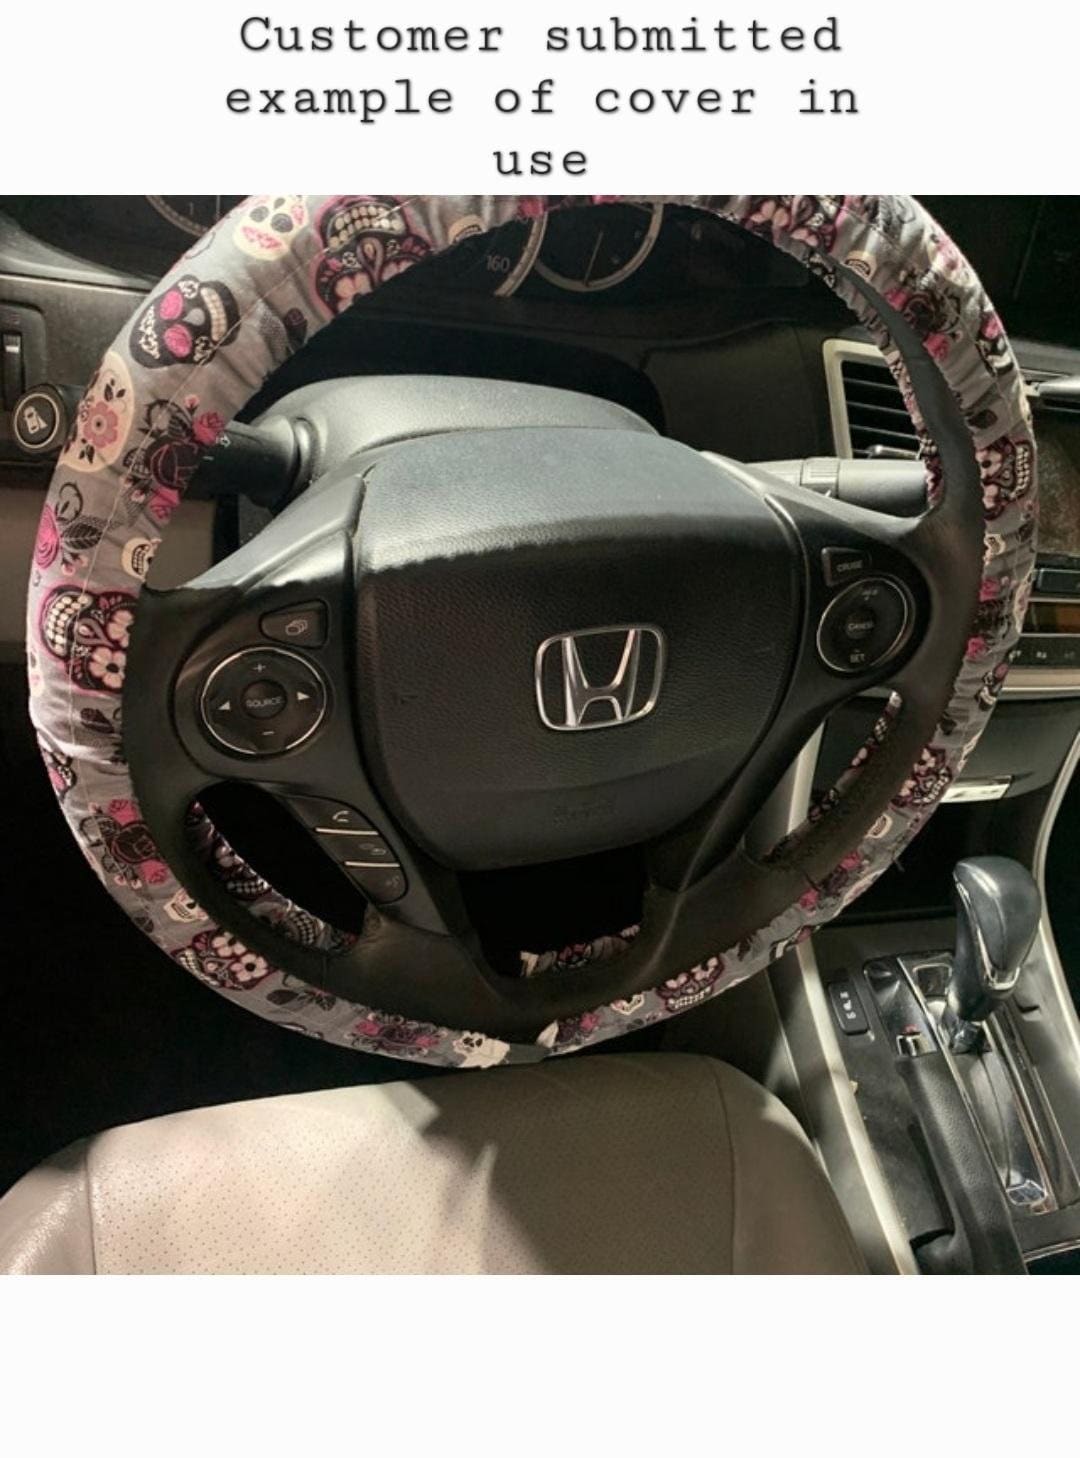 Galaxy Cat Steering Wheel Cover, Handmade - Harlow's Store and Garden Gifts